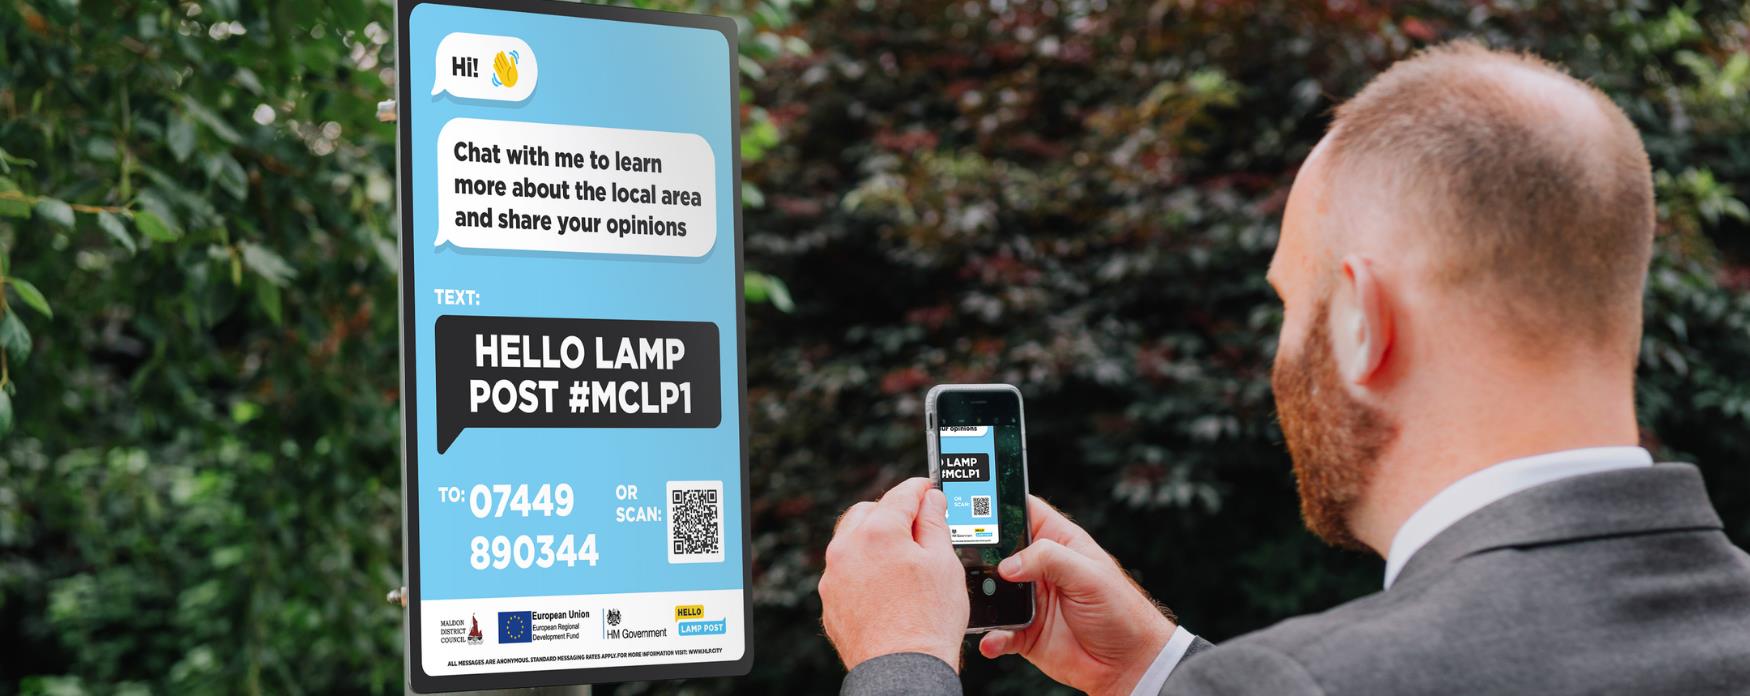 Man in suit pointing smart phone at poster explaining Hello Lamp Post